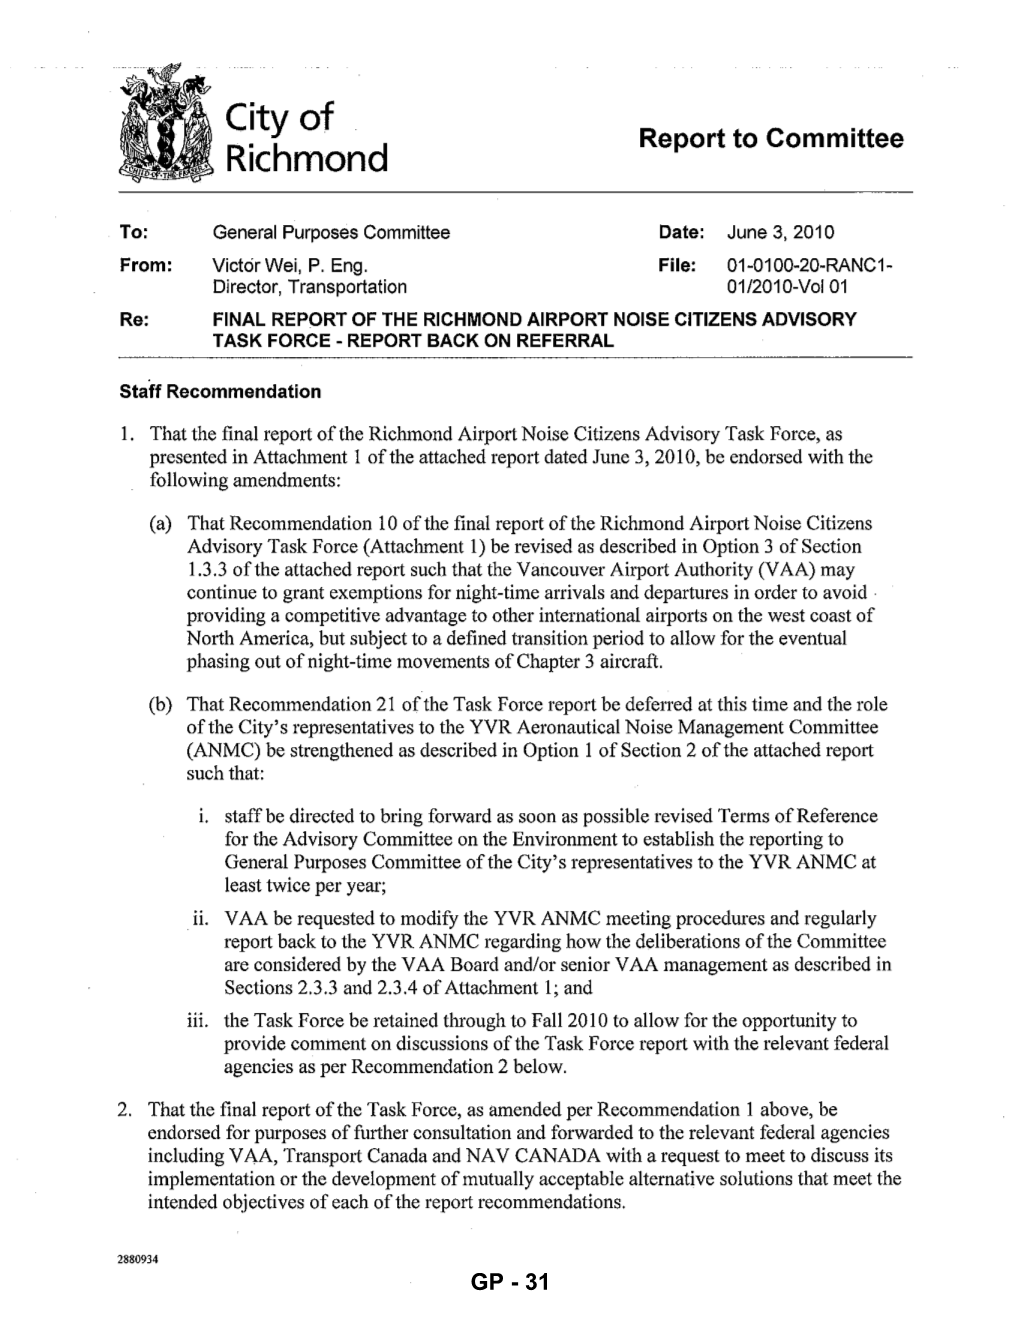 Final Report of the Richmond Airport Noise Citizens